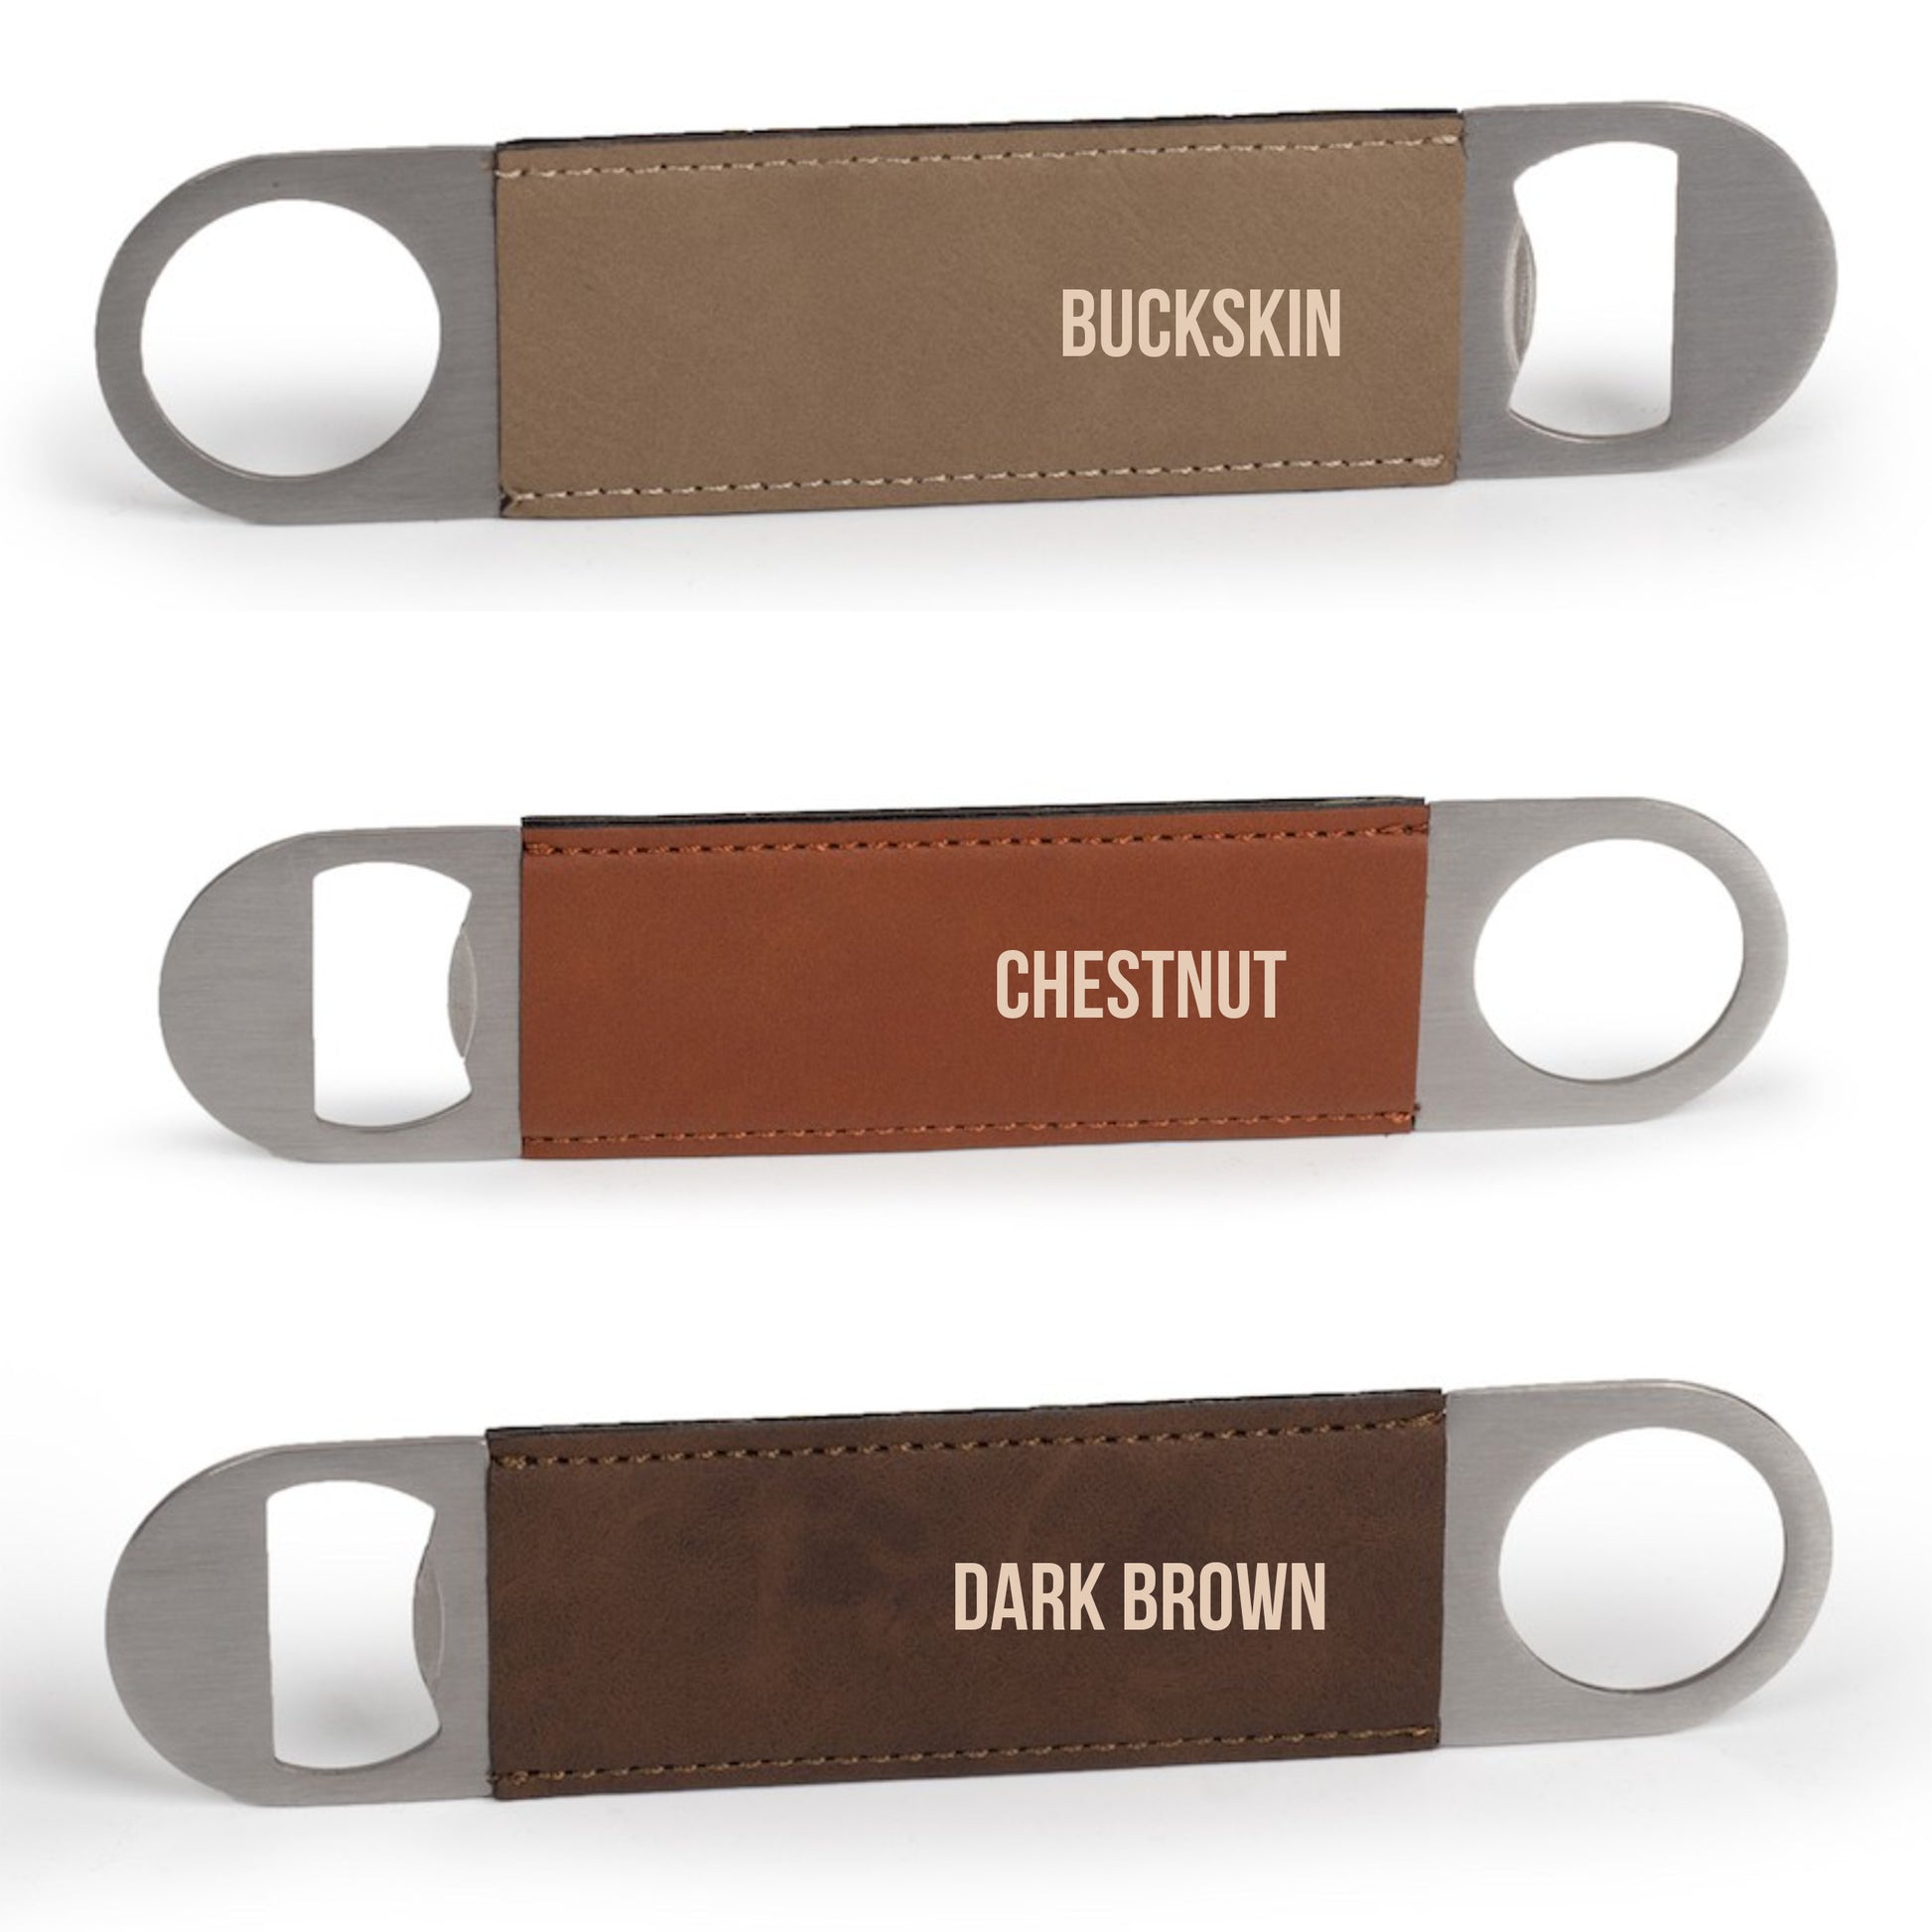 Custom engraved leatherette bottle opener for Graduates, Guys, Grooms, Father's Day gift